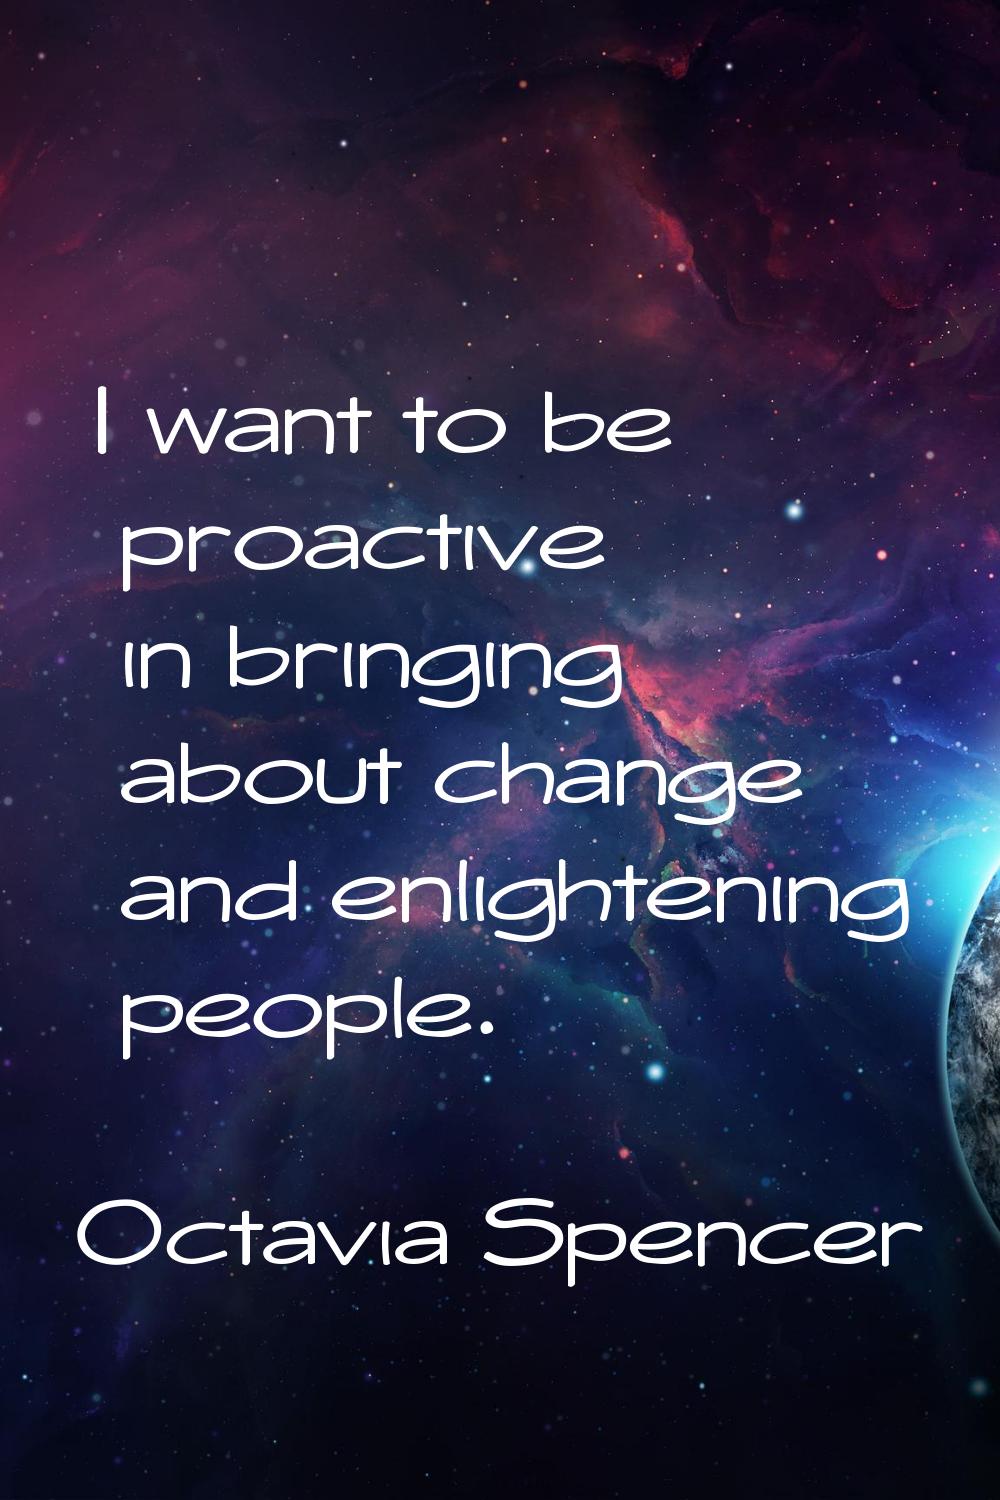 I want to be proactive in bringing about change and enlightening people.